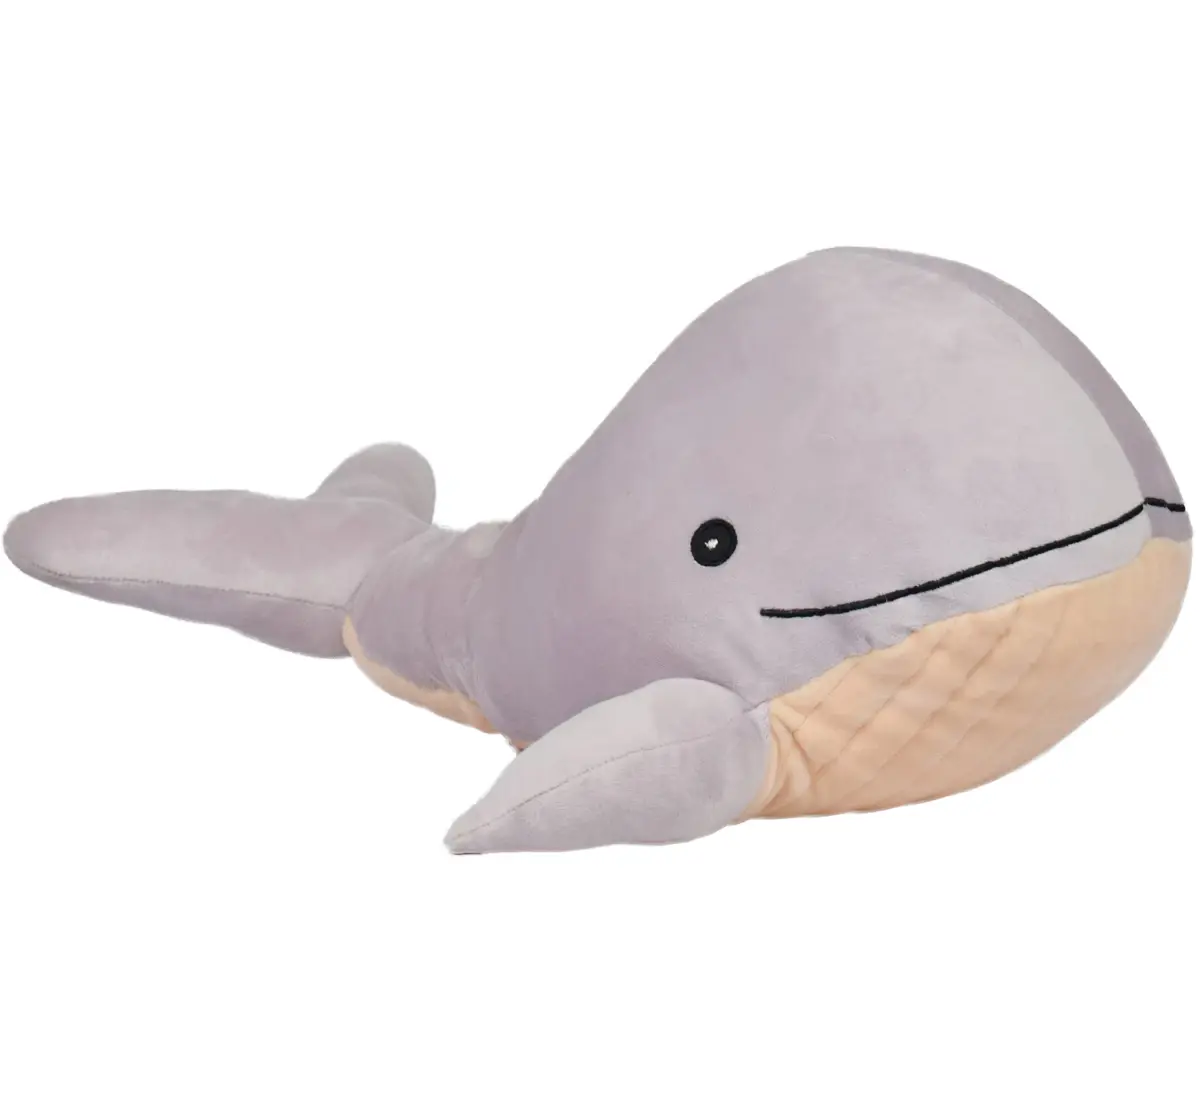 Mirada Super Soft Whale Polyester plush toy Multicolor 3Y+